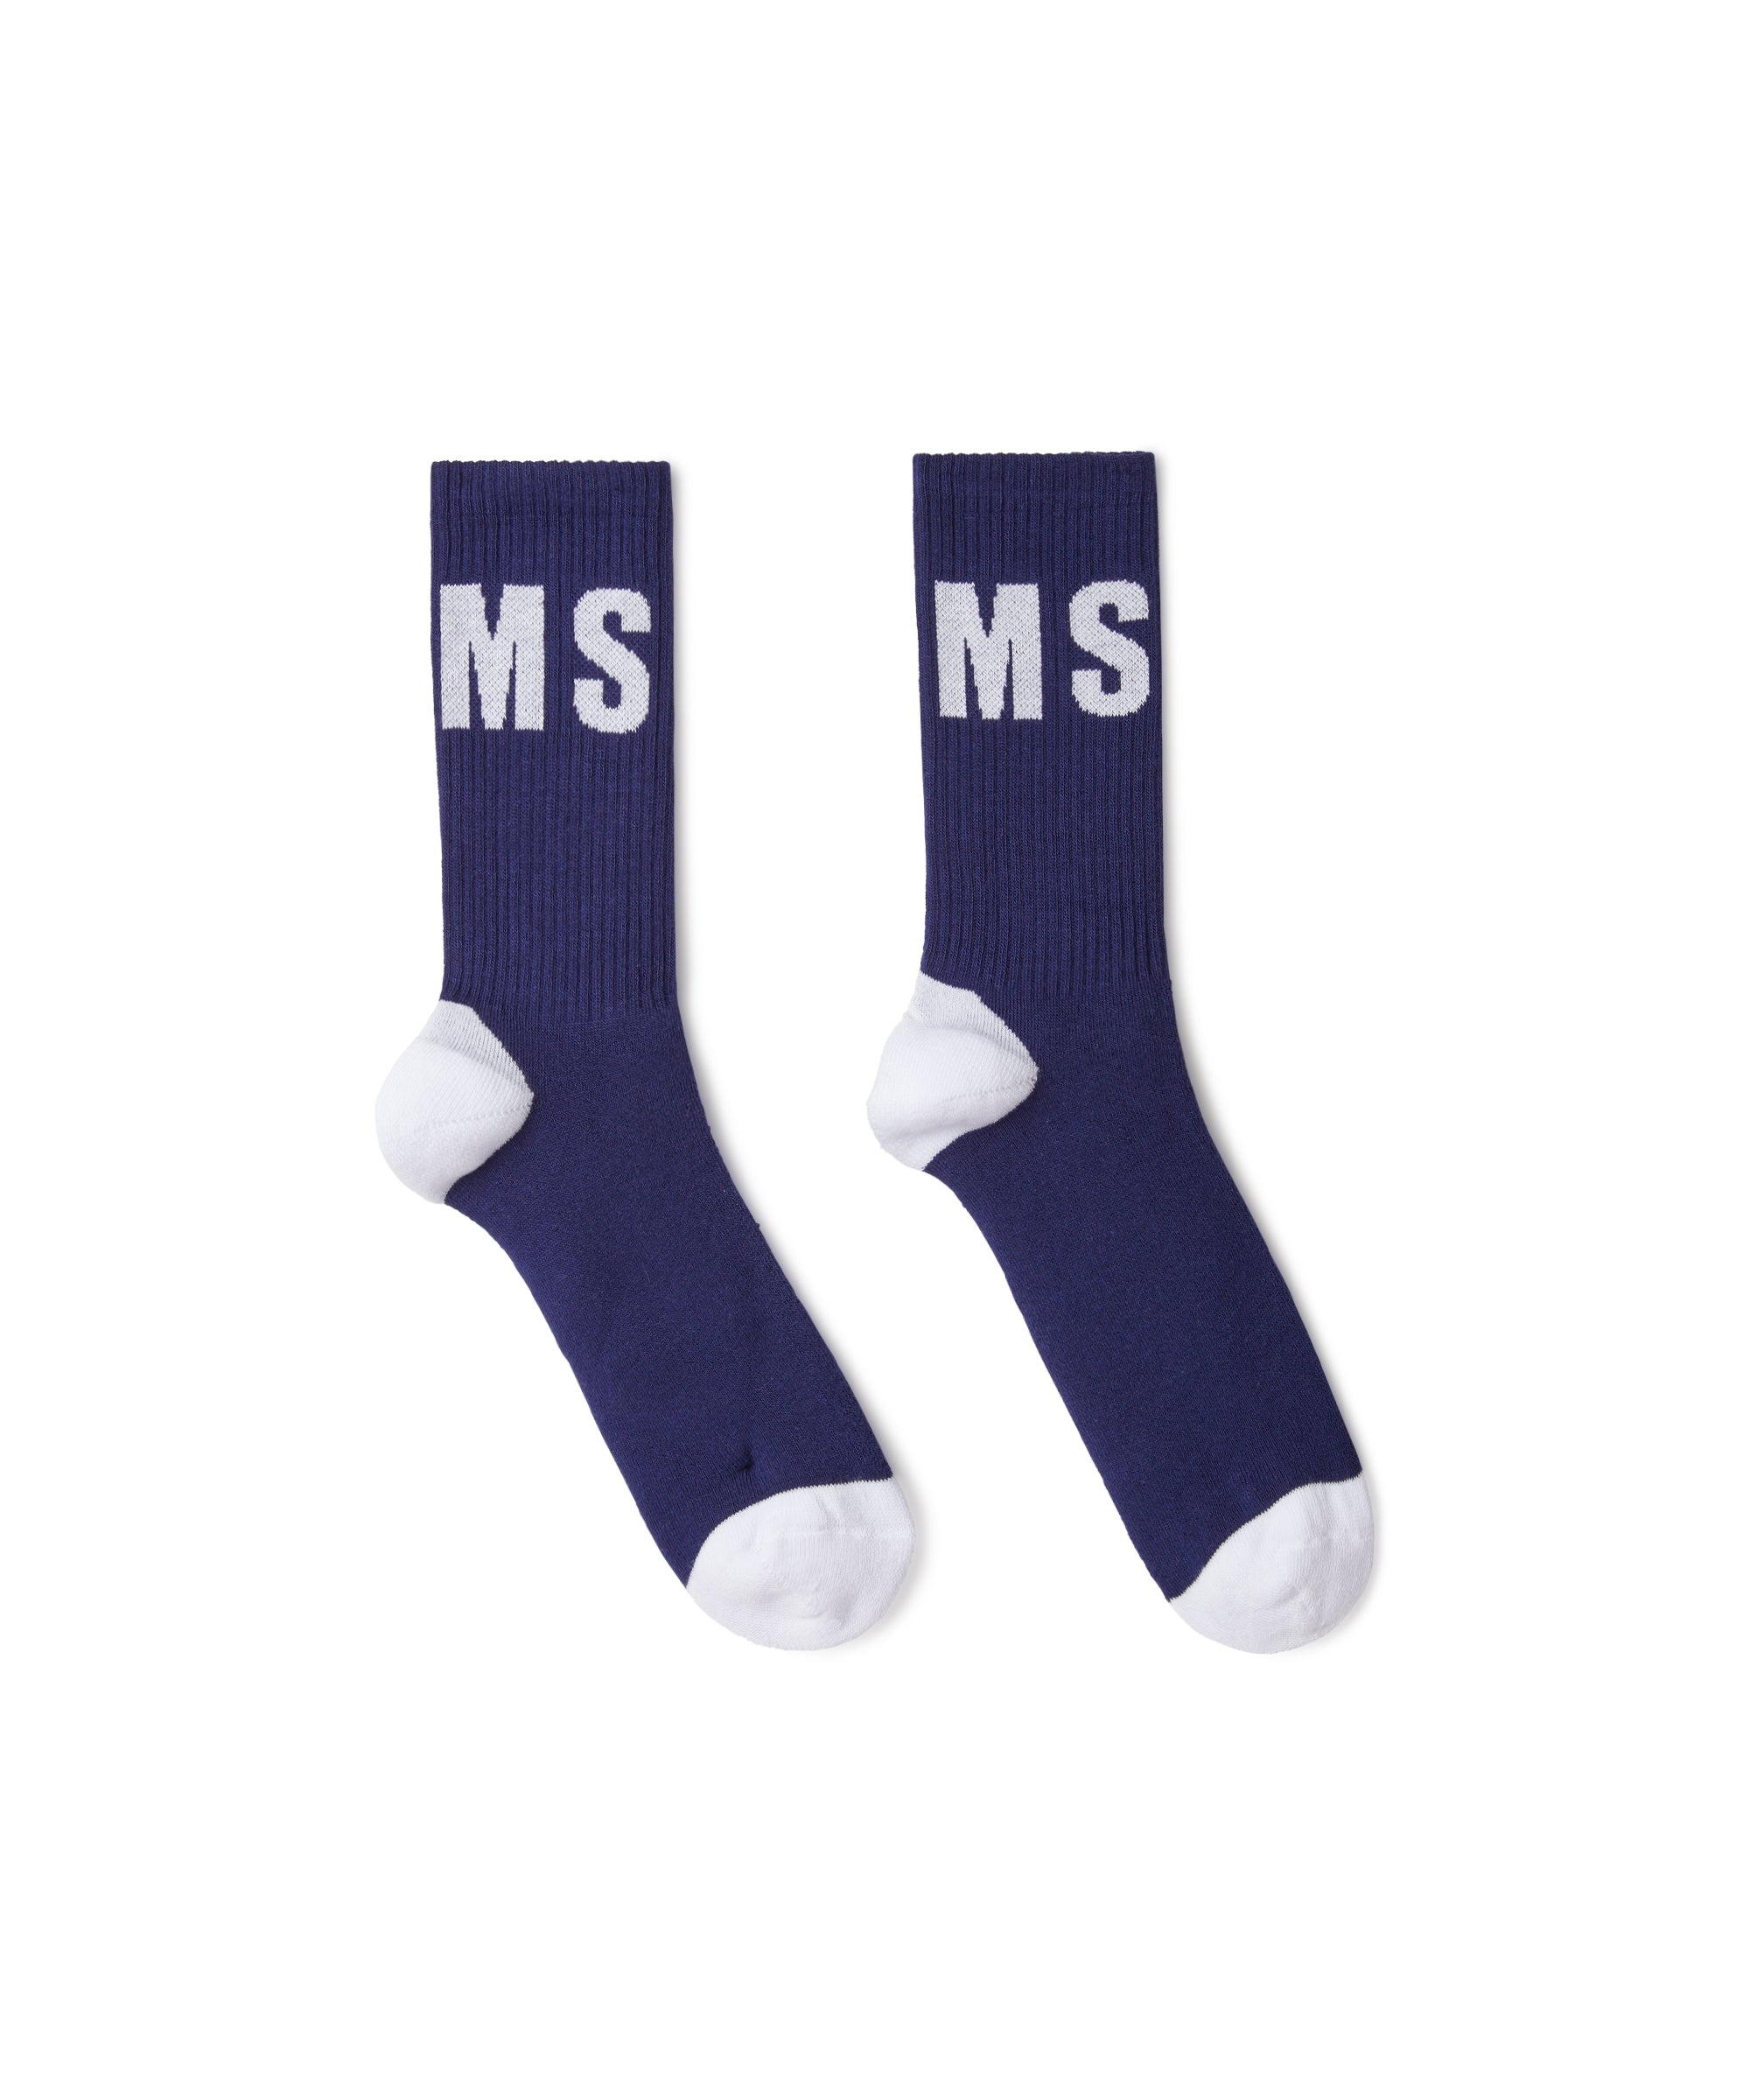 Solid color cotton socks with MSGM logo - 1